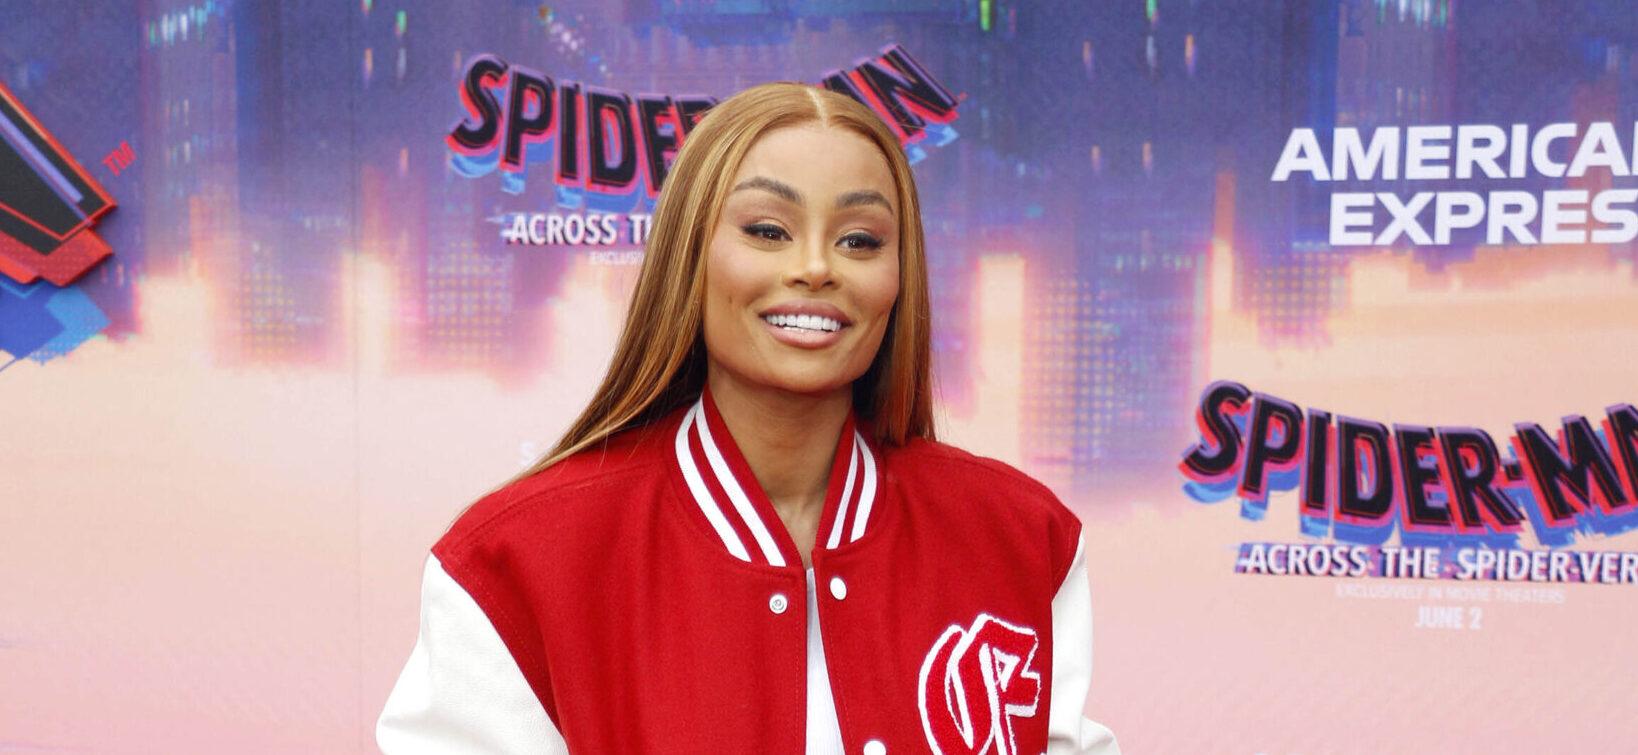 Blac Chyna at the Los Angeles premiere of 'Spider-Man: Across the Spider-Verse' - Arrivals